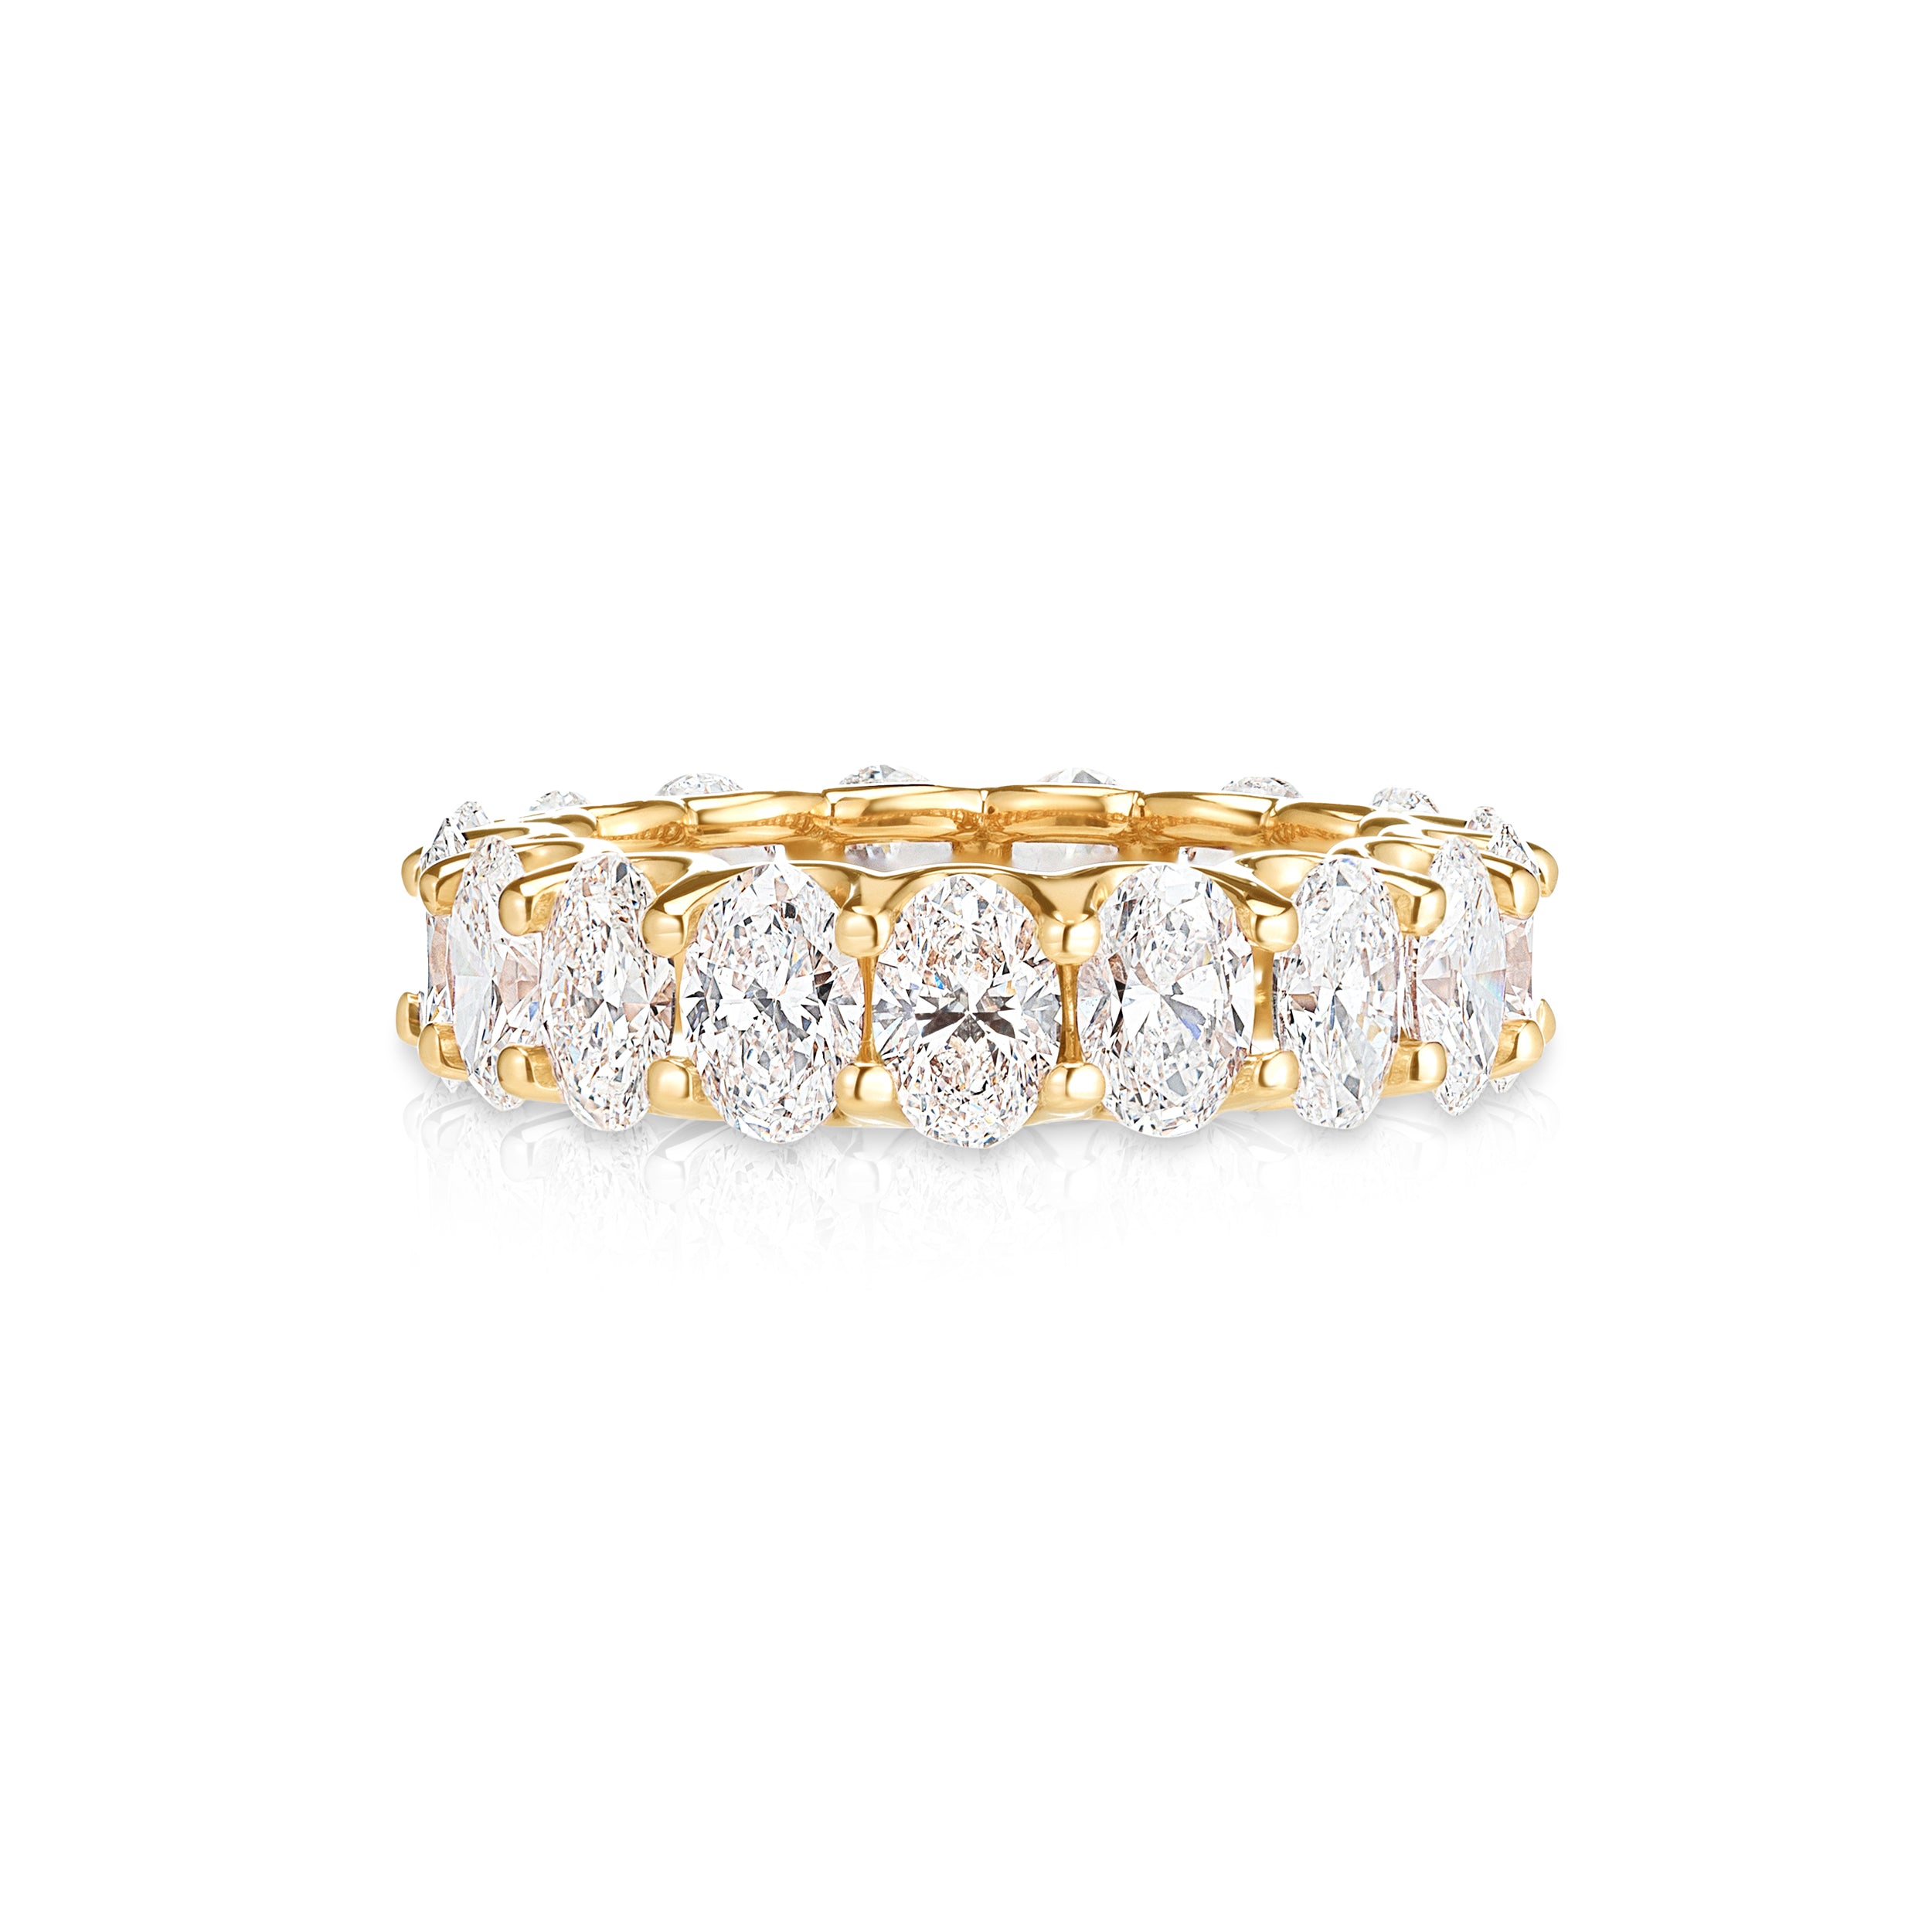 Oval Eternity Ring